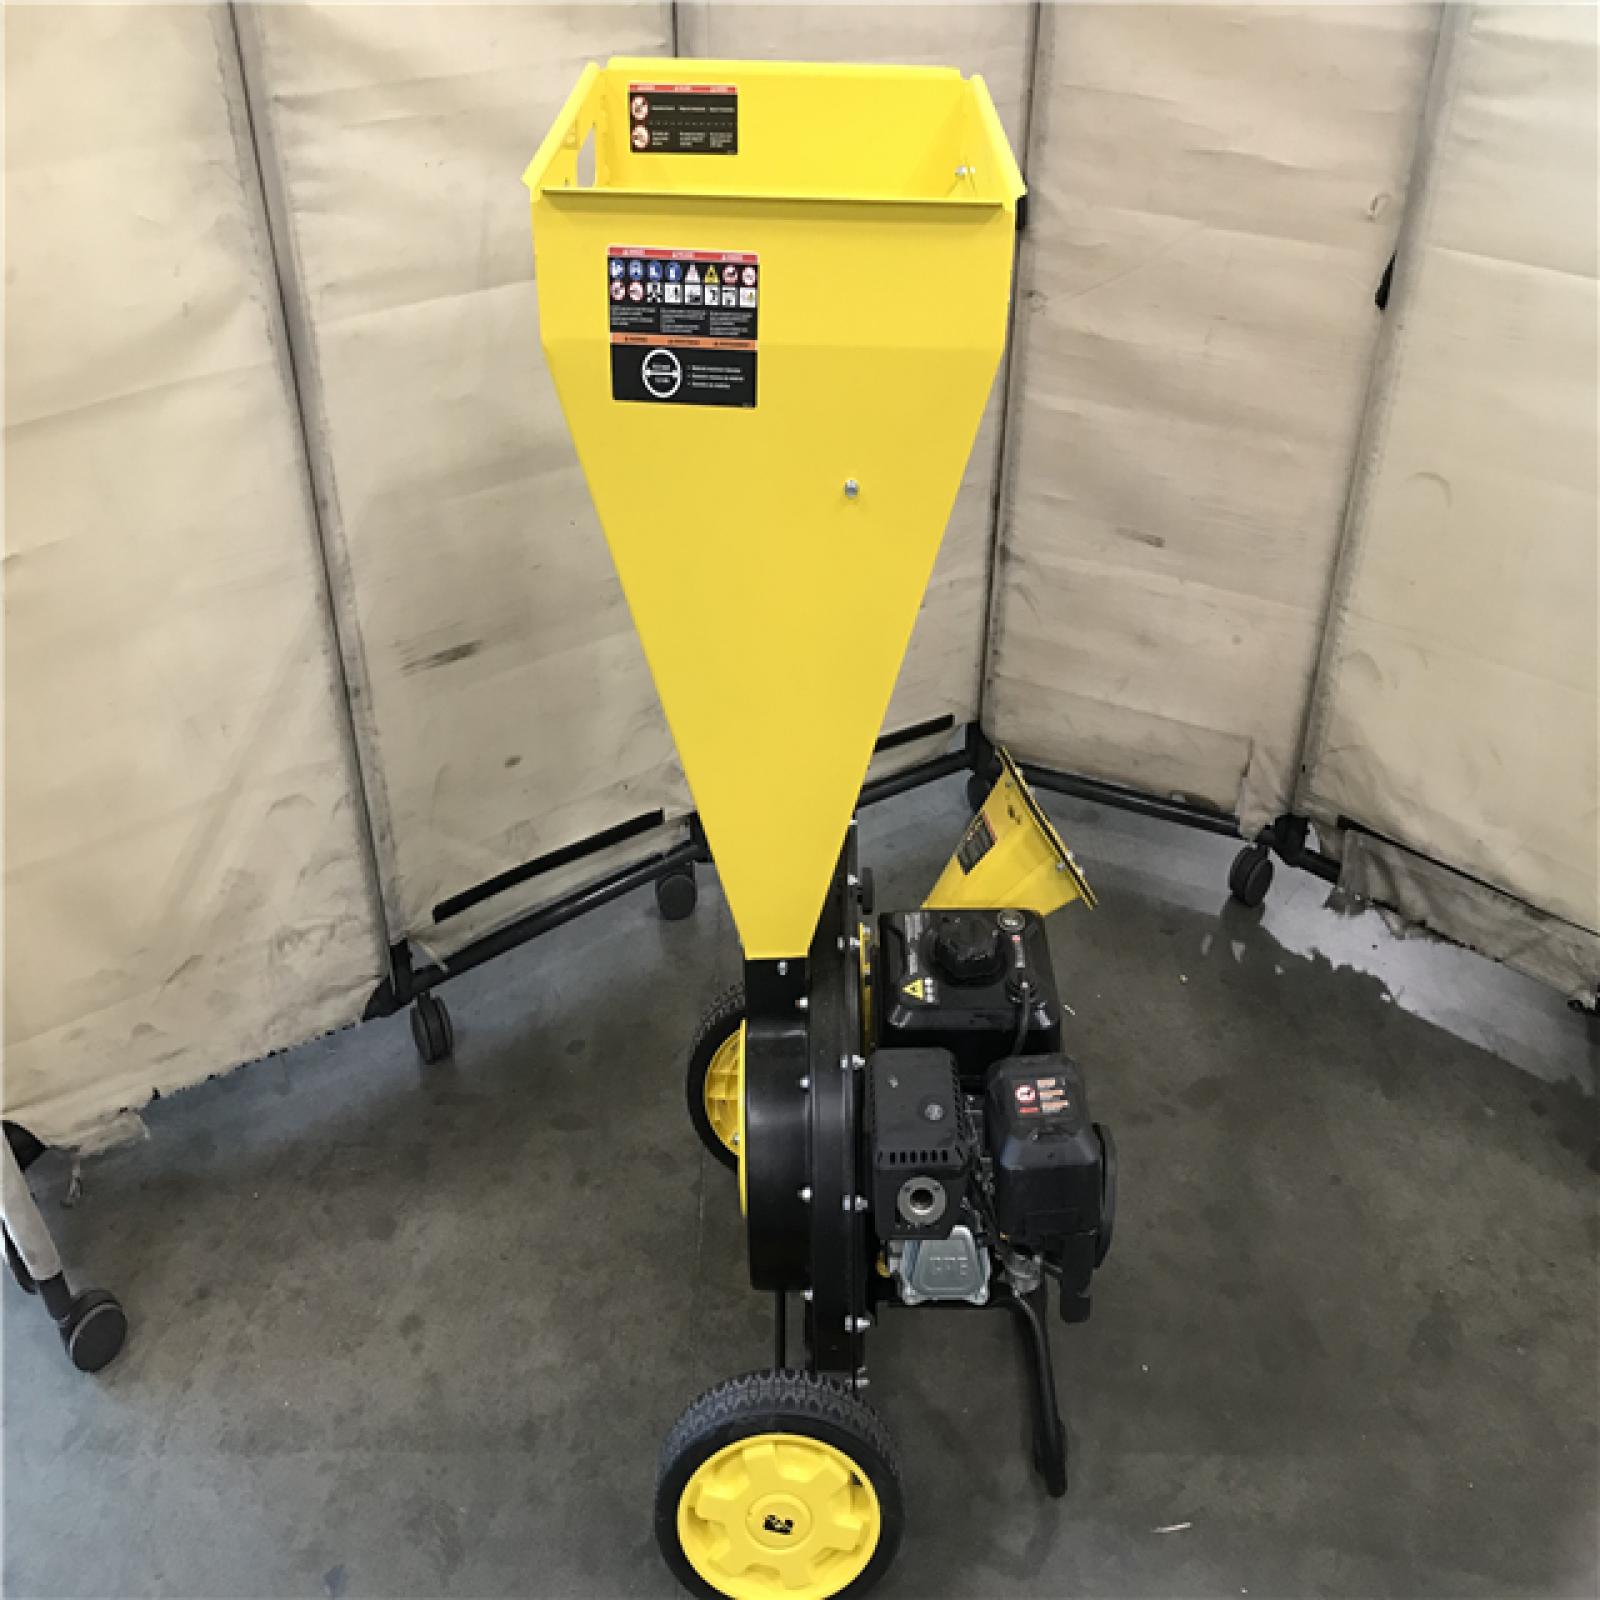 California AS-IS Champion Power Equipment 3 in. Dia 224 Cc 2-in-1 Upright Gas Powered Wood Chipper Shredder